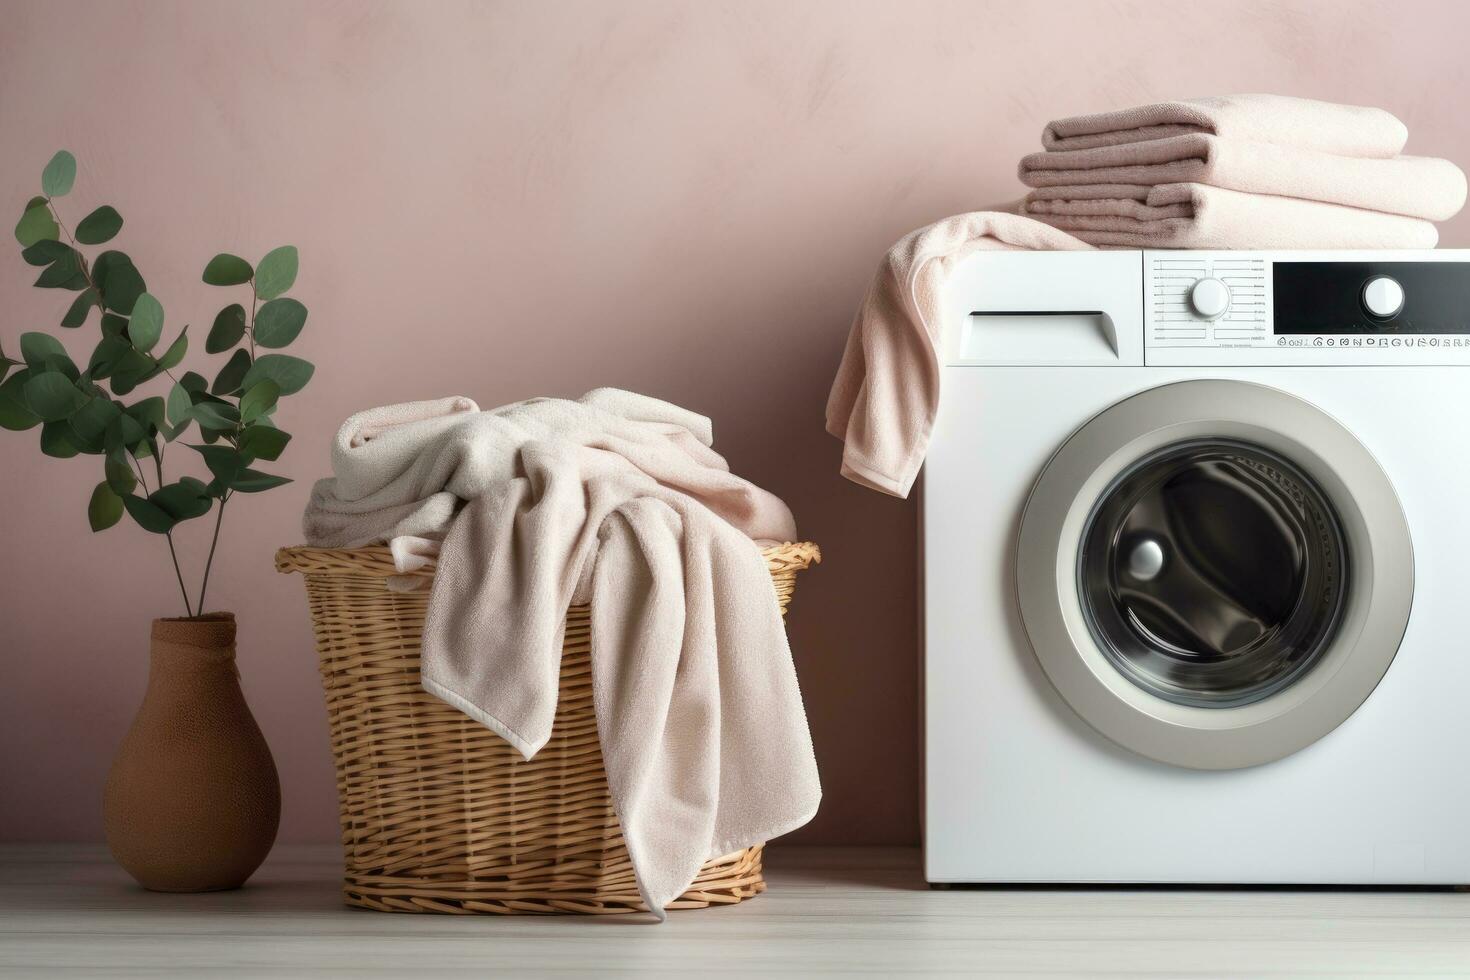 Washing machine and towels in a basket photo